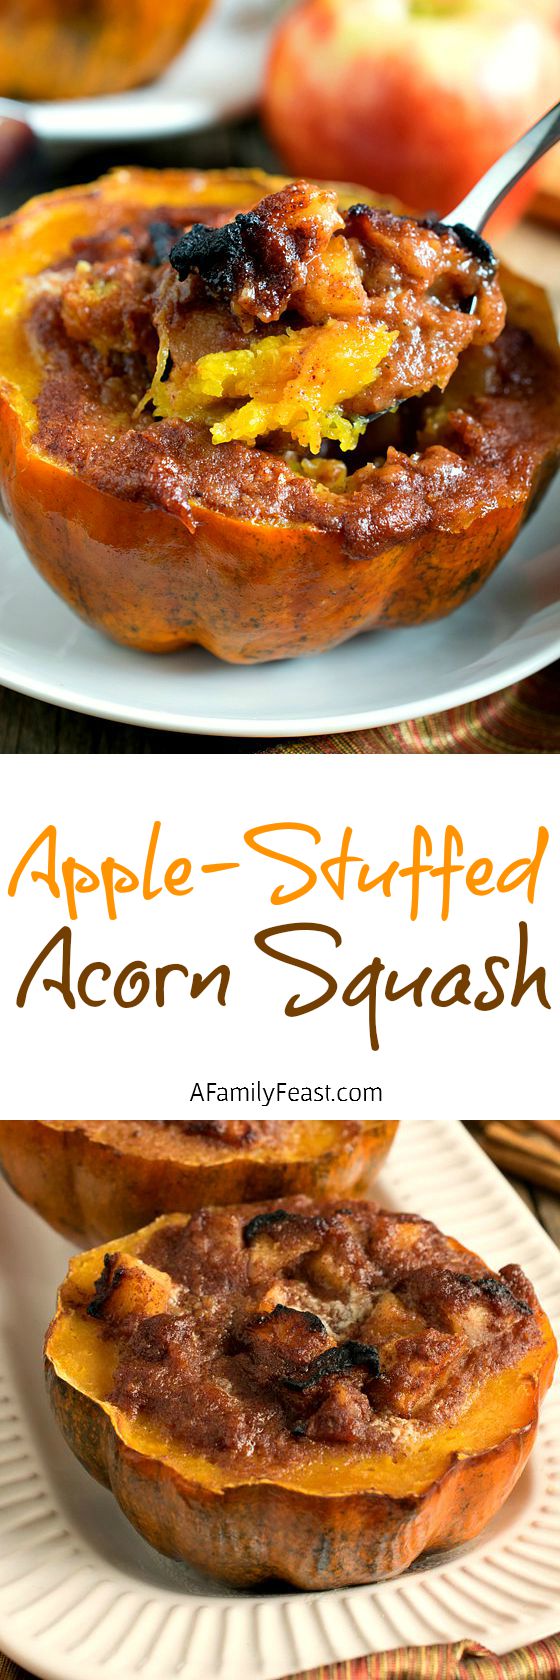 Apple-Stuffed Acorn Squash - Enjoy the delicious flavors of Fall with this easy recipe!